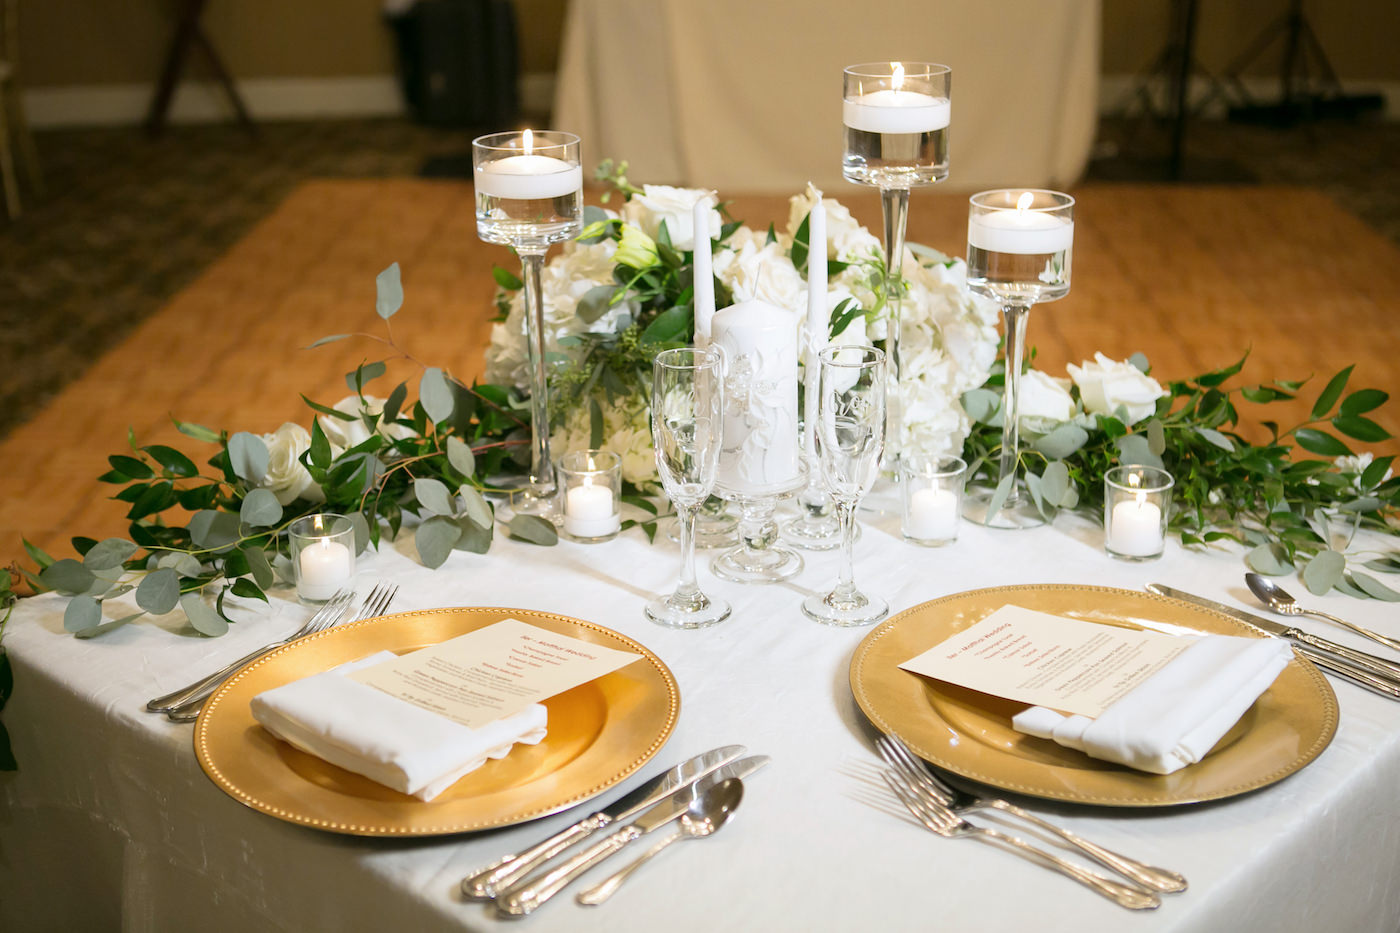 Tampa Classic Timeless Wedding Reception Decor, Sweetheart Table with White Linen, Gold Chargers, Floating Candlesticks , Eucalyptus Greenery and White Florals | Wedding Photographer Carrie Wildes Photography